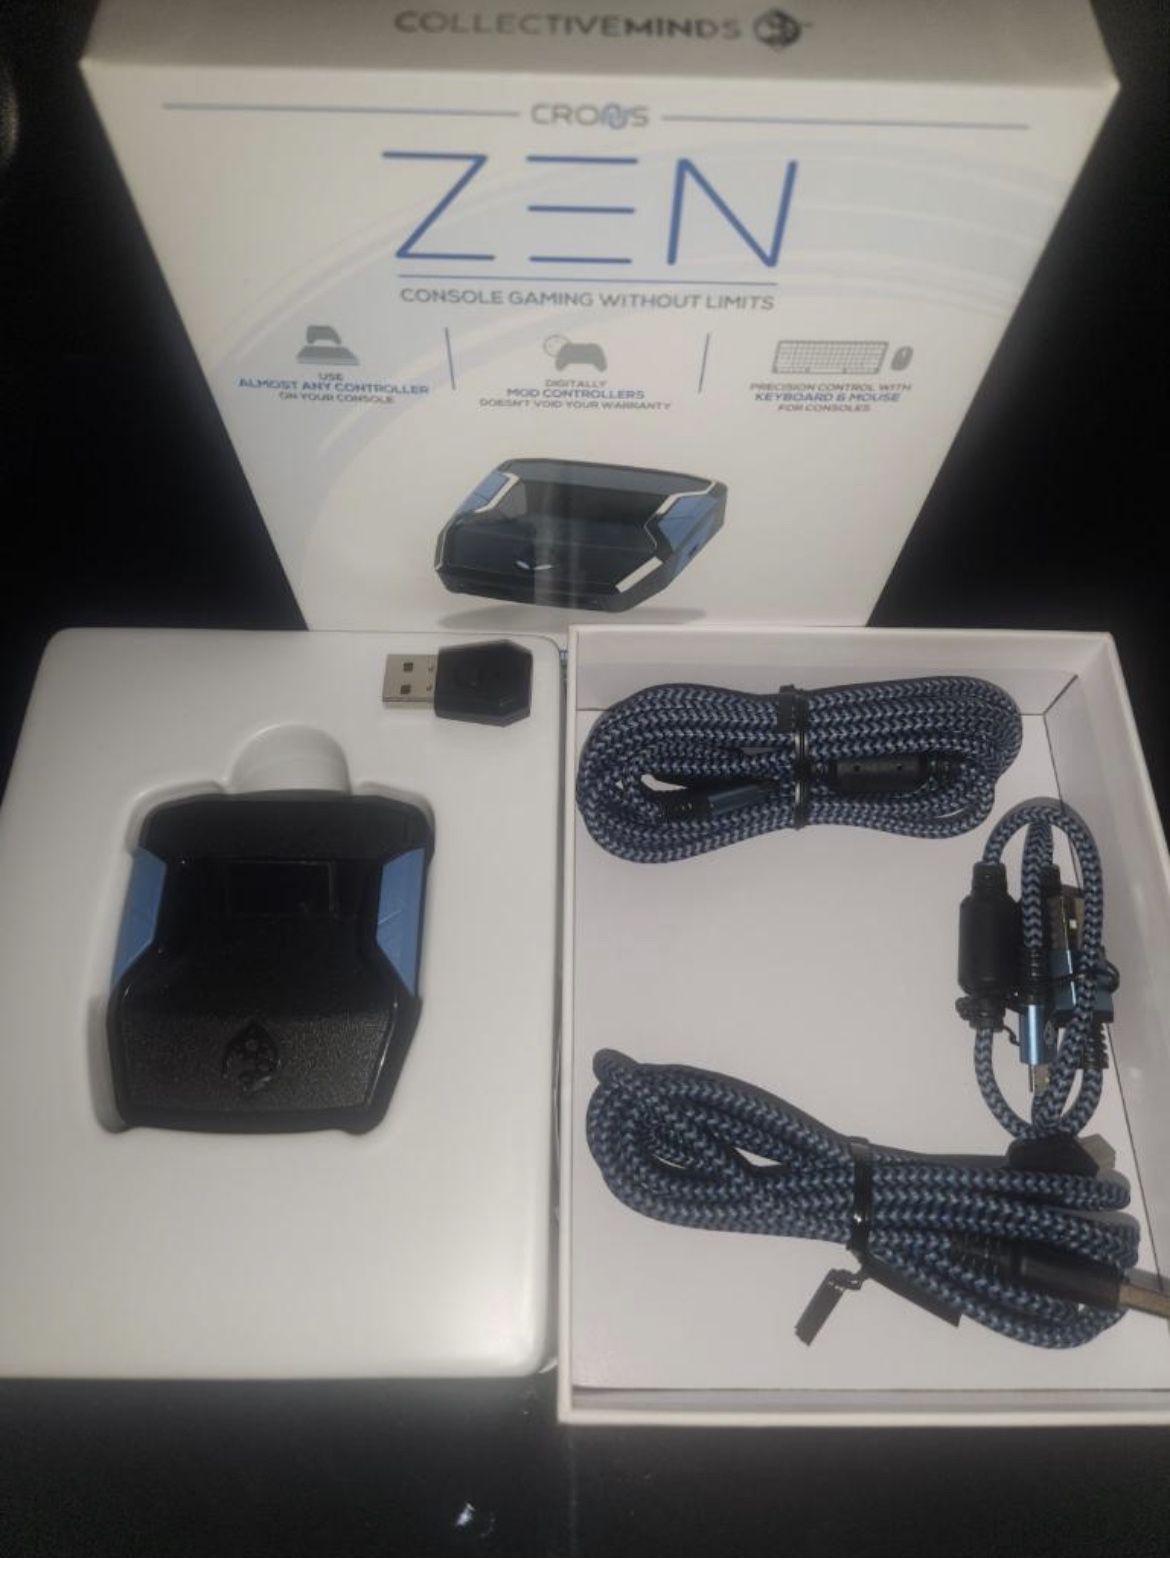 How to Use Cronus Zen With or Without a Dongle on PS5